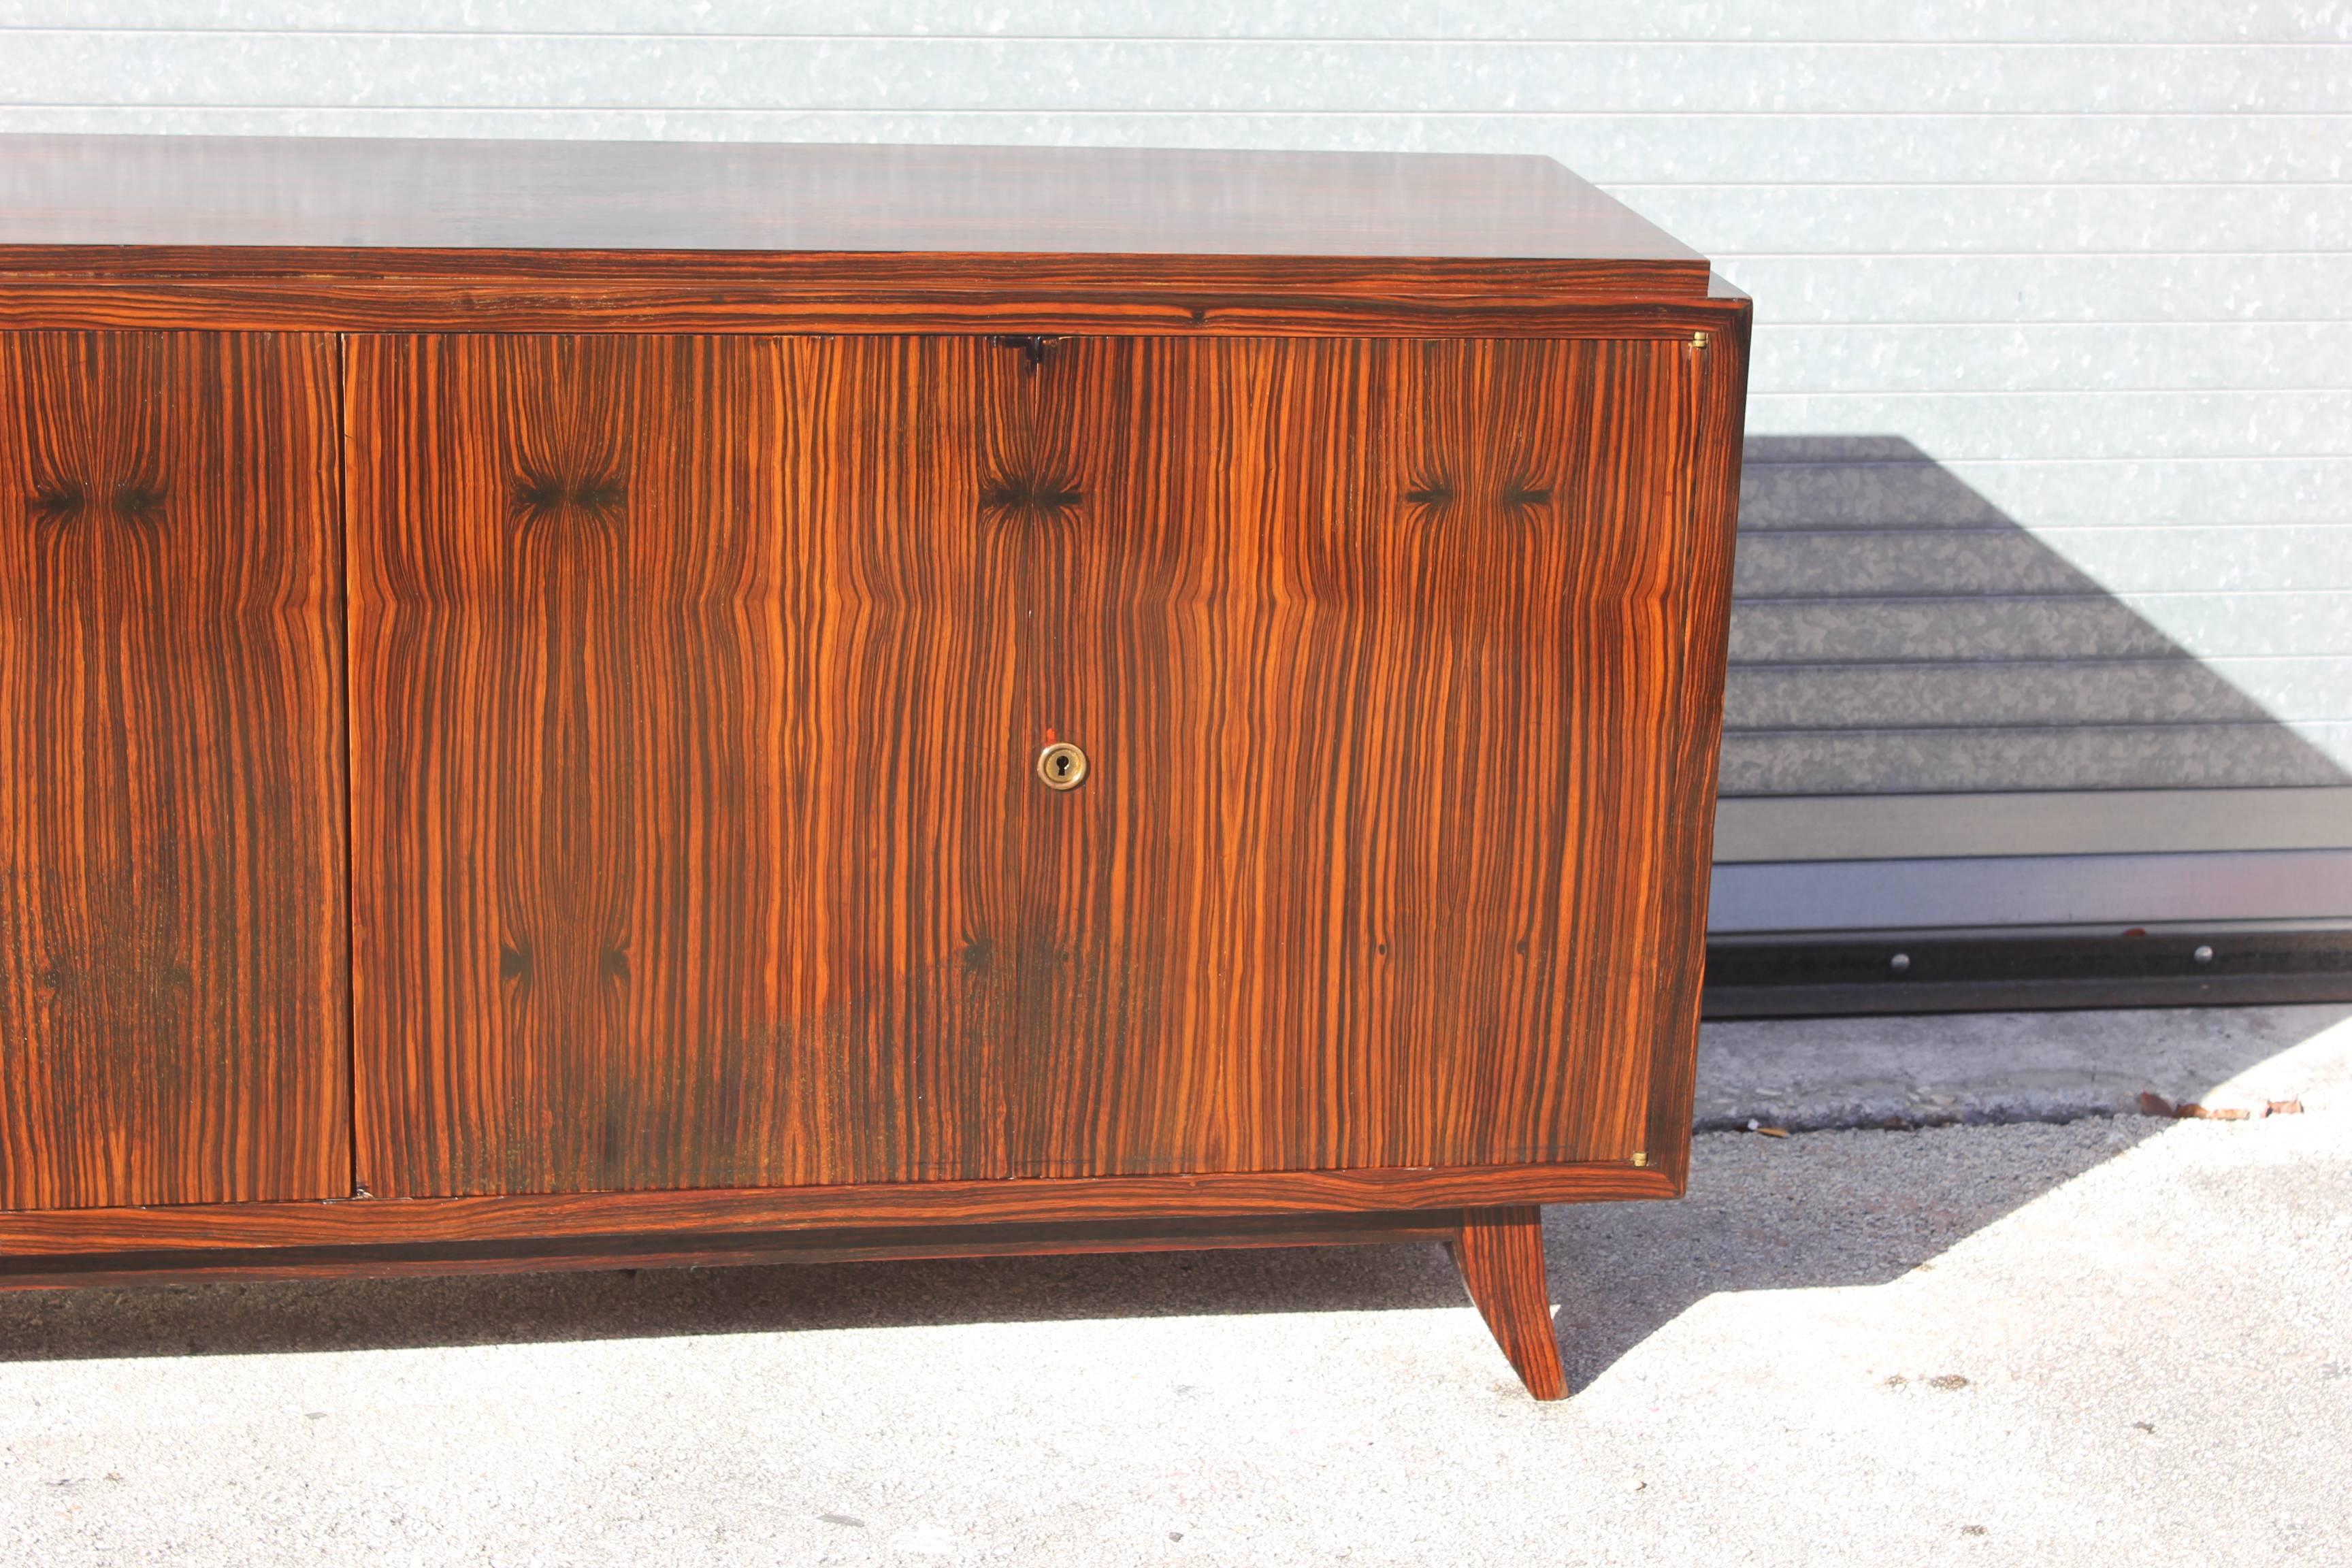 Absolutely stunning French Art Deco Macassar ebony sideboard or Buffet, four doors, most certainly an unsigned designer piece, this sideboard is of the highest quality, circa 1940s.